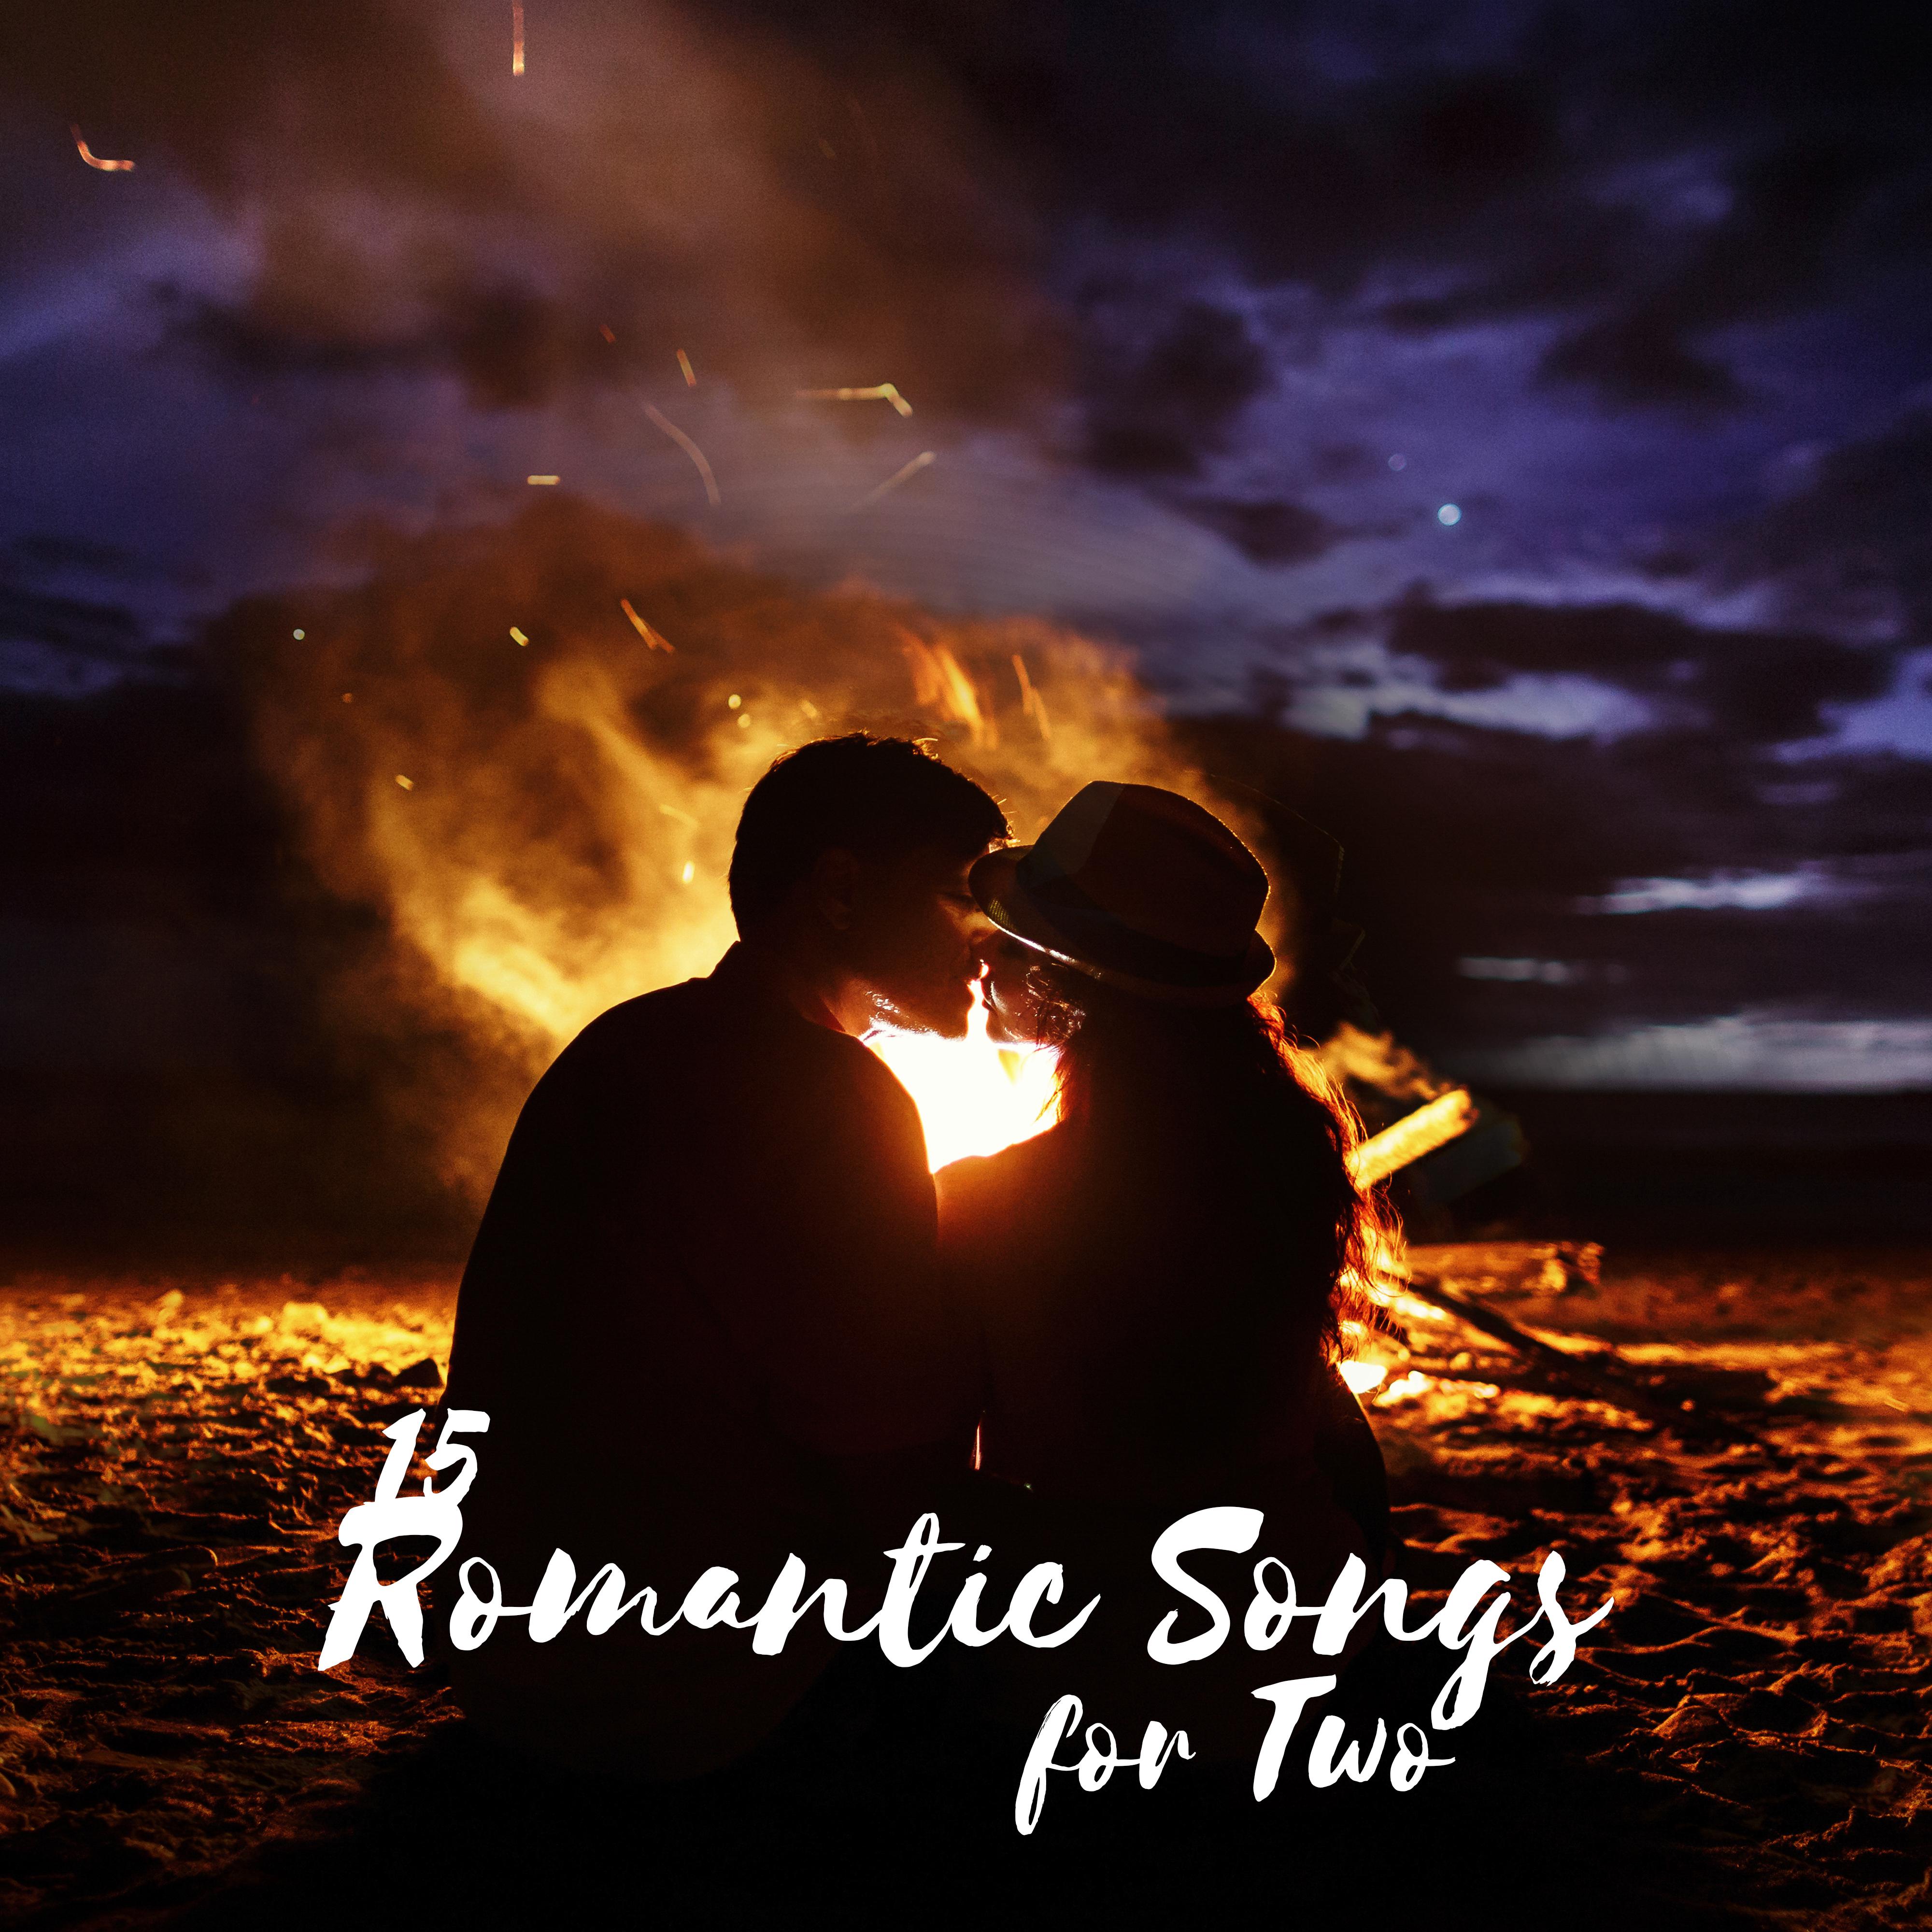 15 Romantic Songs for Two